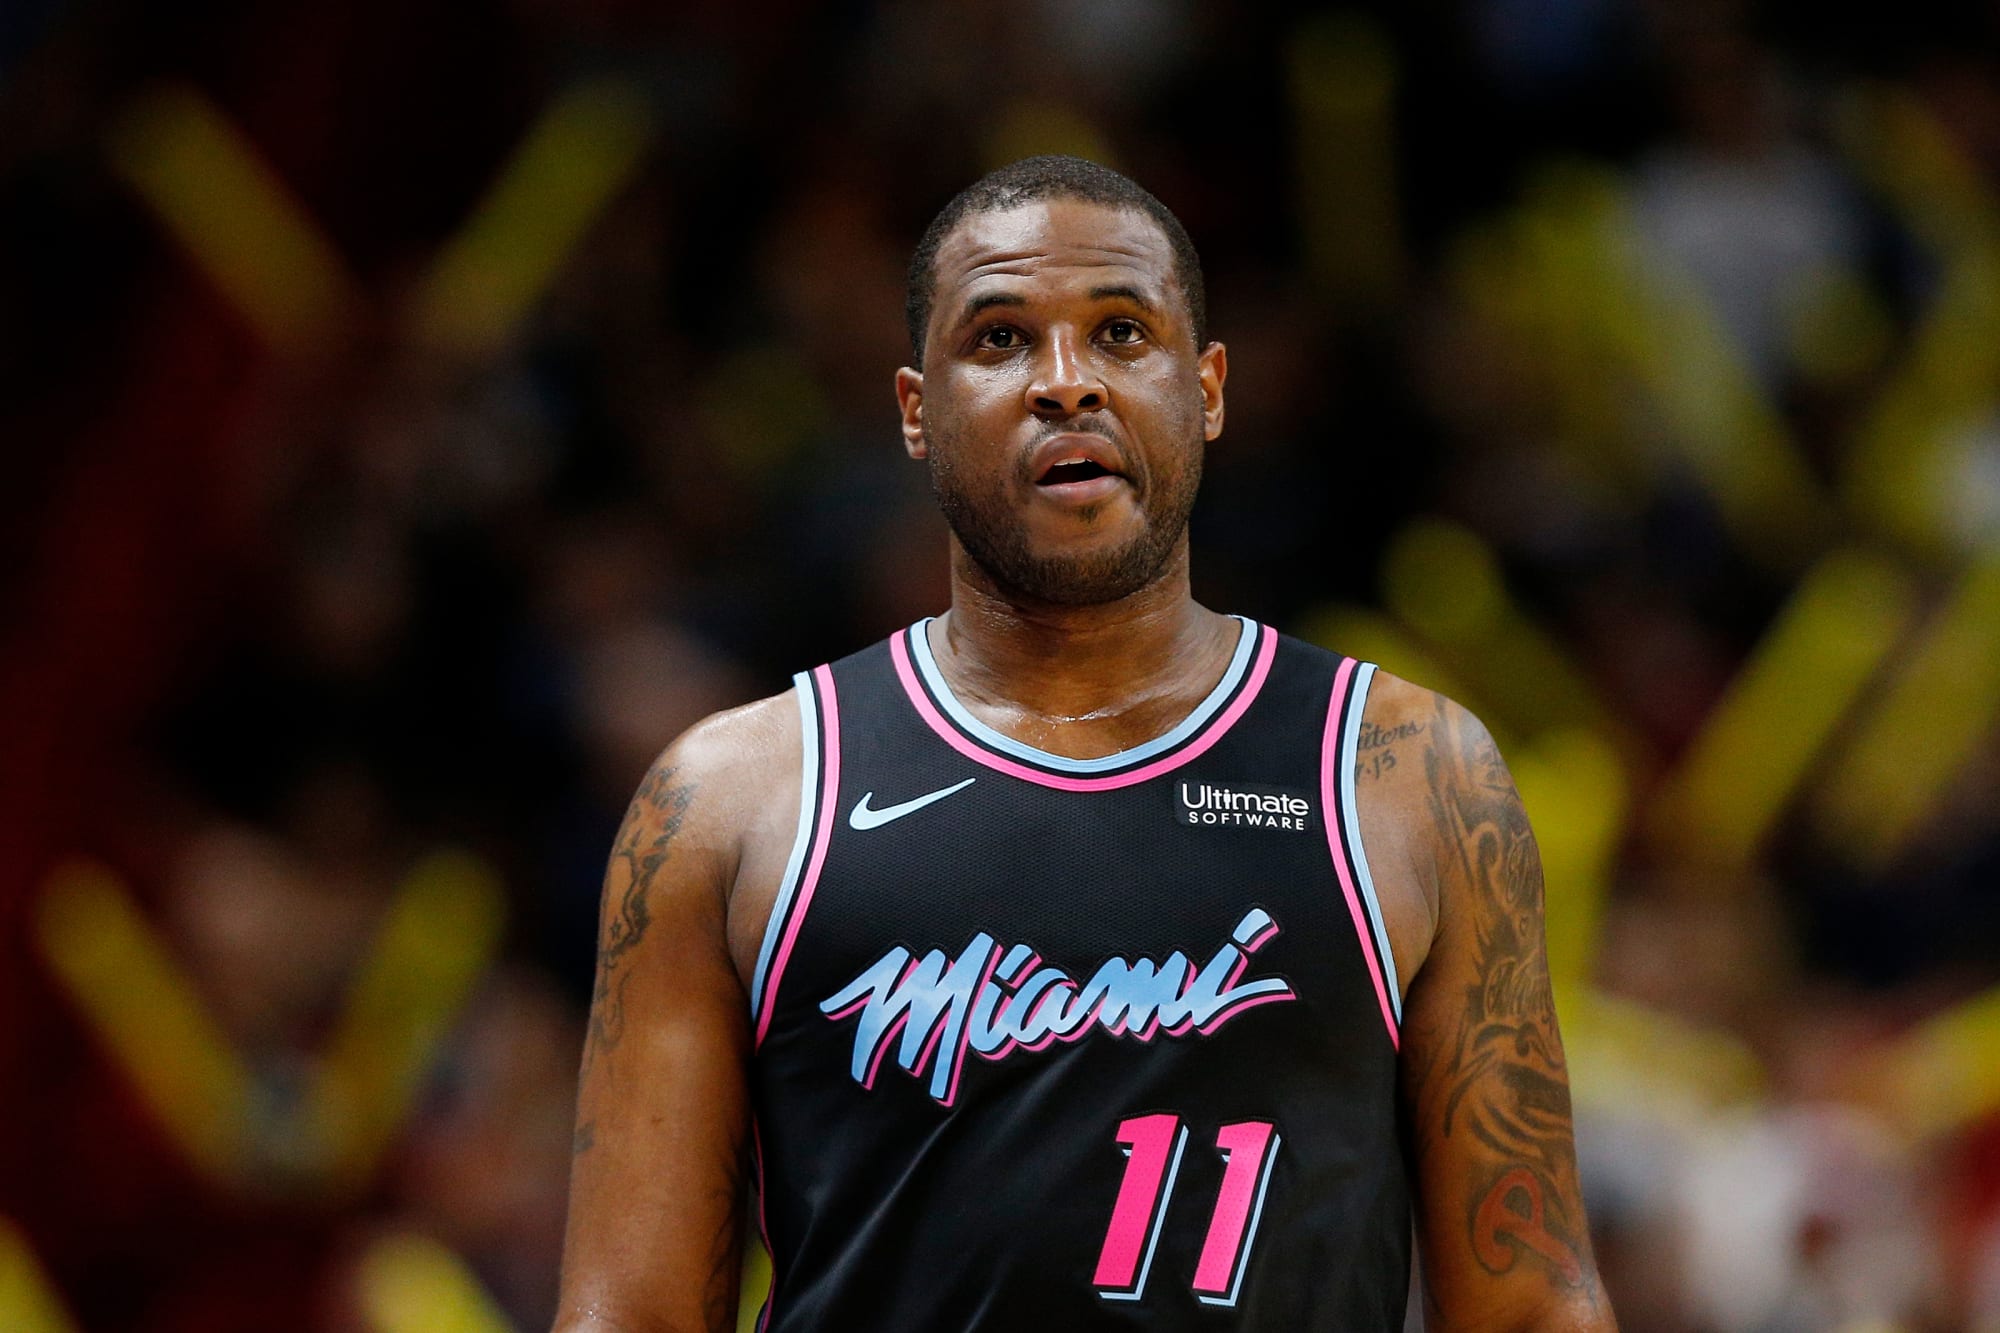 Heat's Dion Waiters posts he has 'seen the writing on the wall